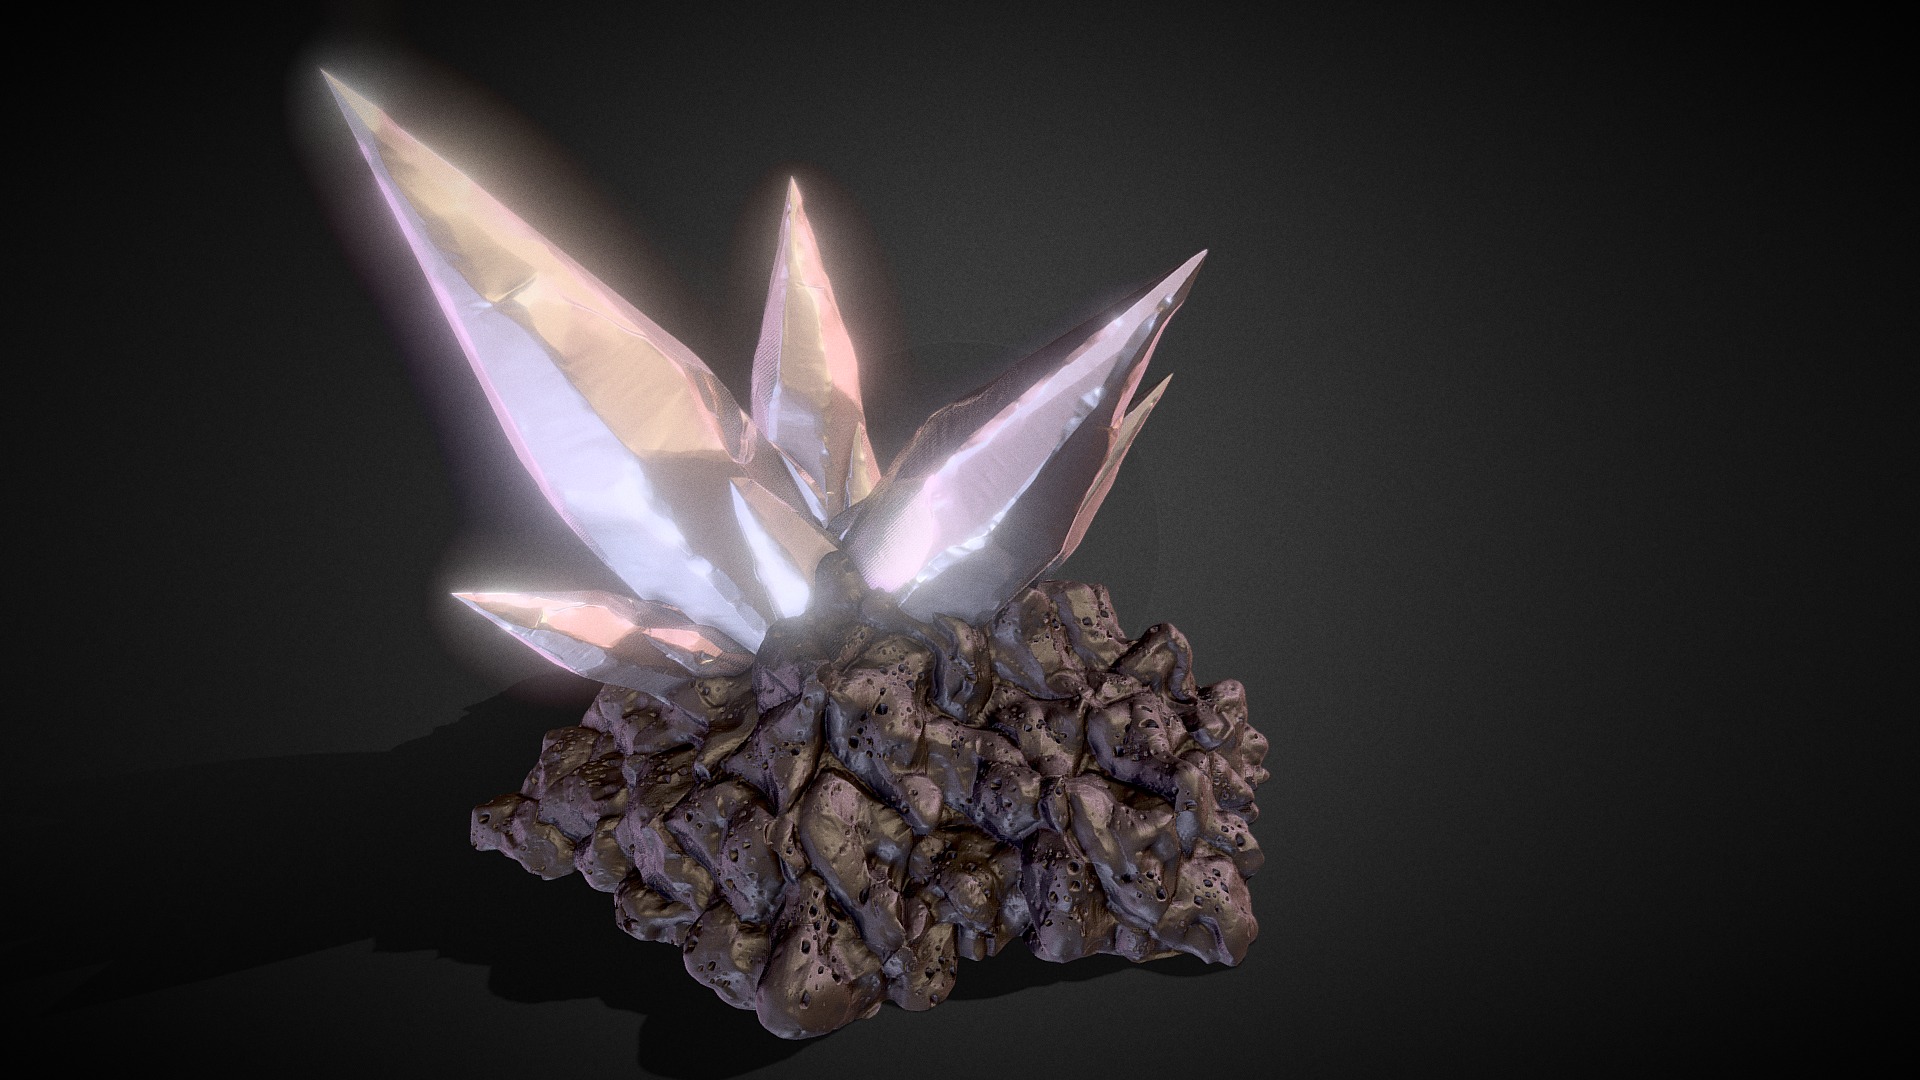 3D model 3D Cave Crystals – High Poly - This is a 3D model of the 3D Cave Crystals - High Poly. The 3D model is about a close-up of a burning matchstick.